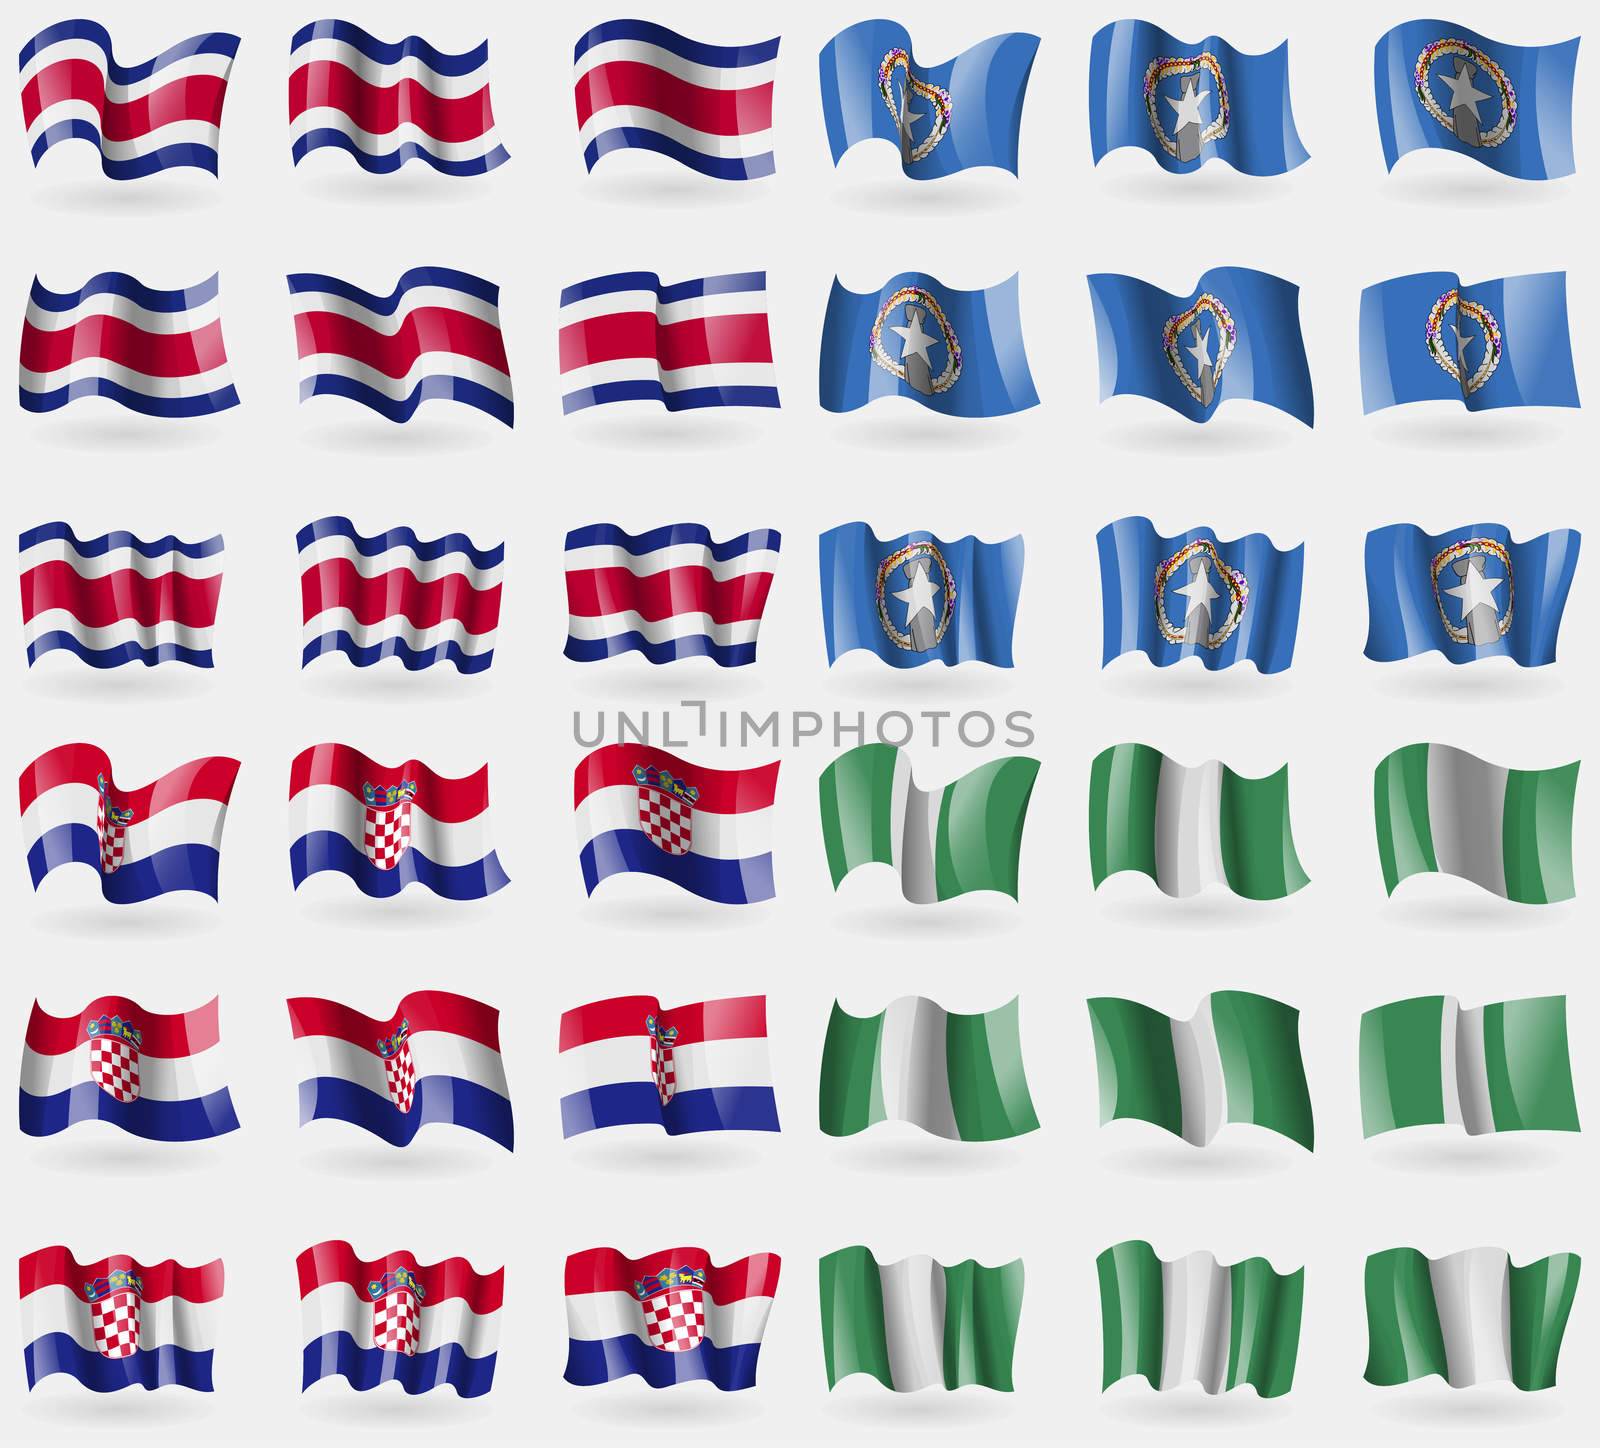 Costa Rica, Marianna Islands, Croatia, Nigeria. Set of 36 flags of the countries of the world. illustration